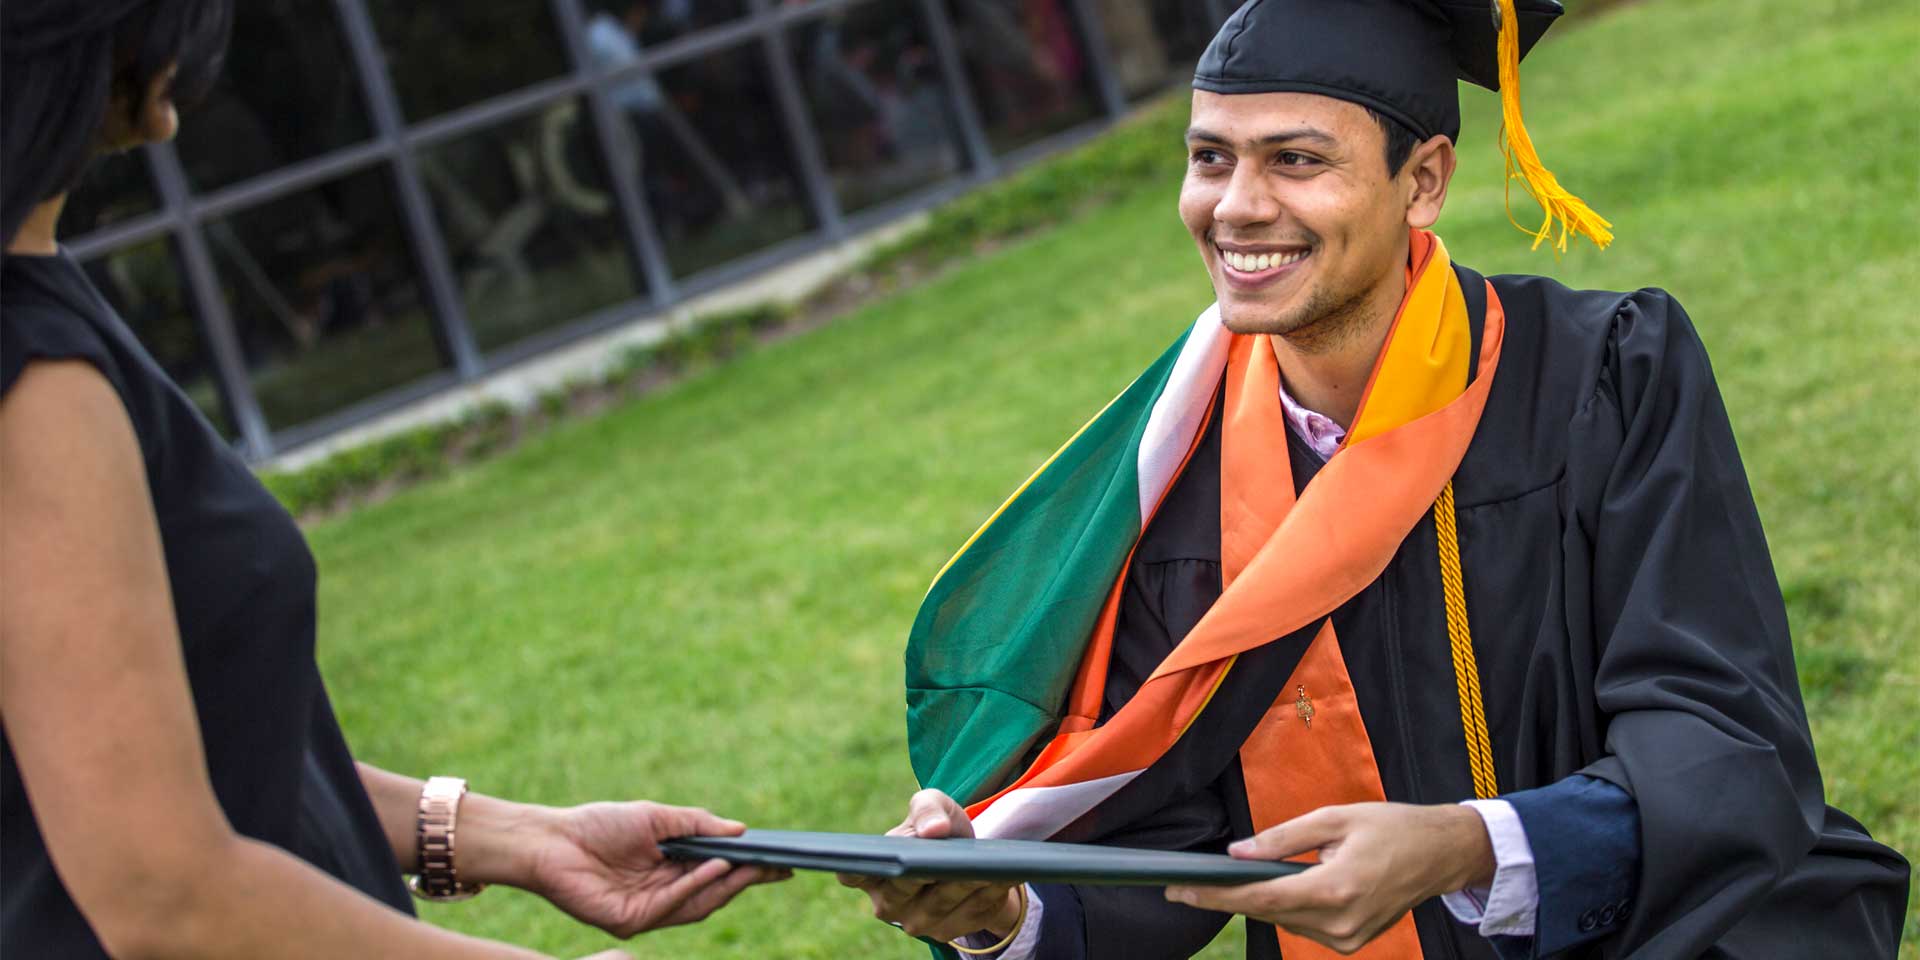 Kumar Gaurav graduated with a master’s degree in information technology and management